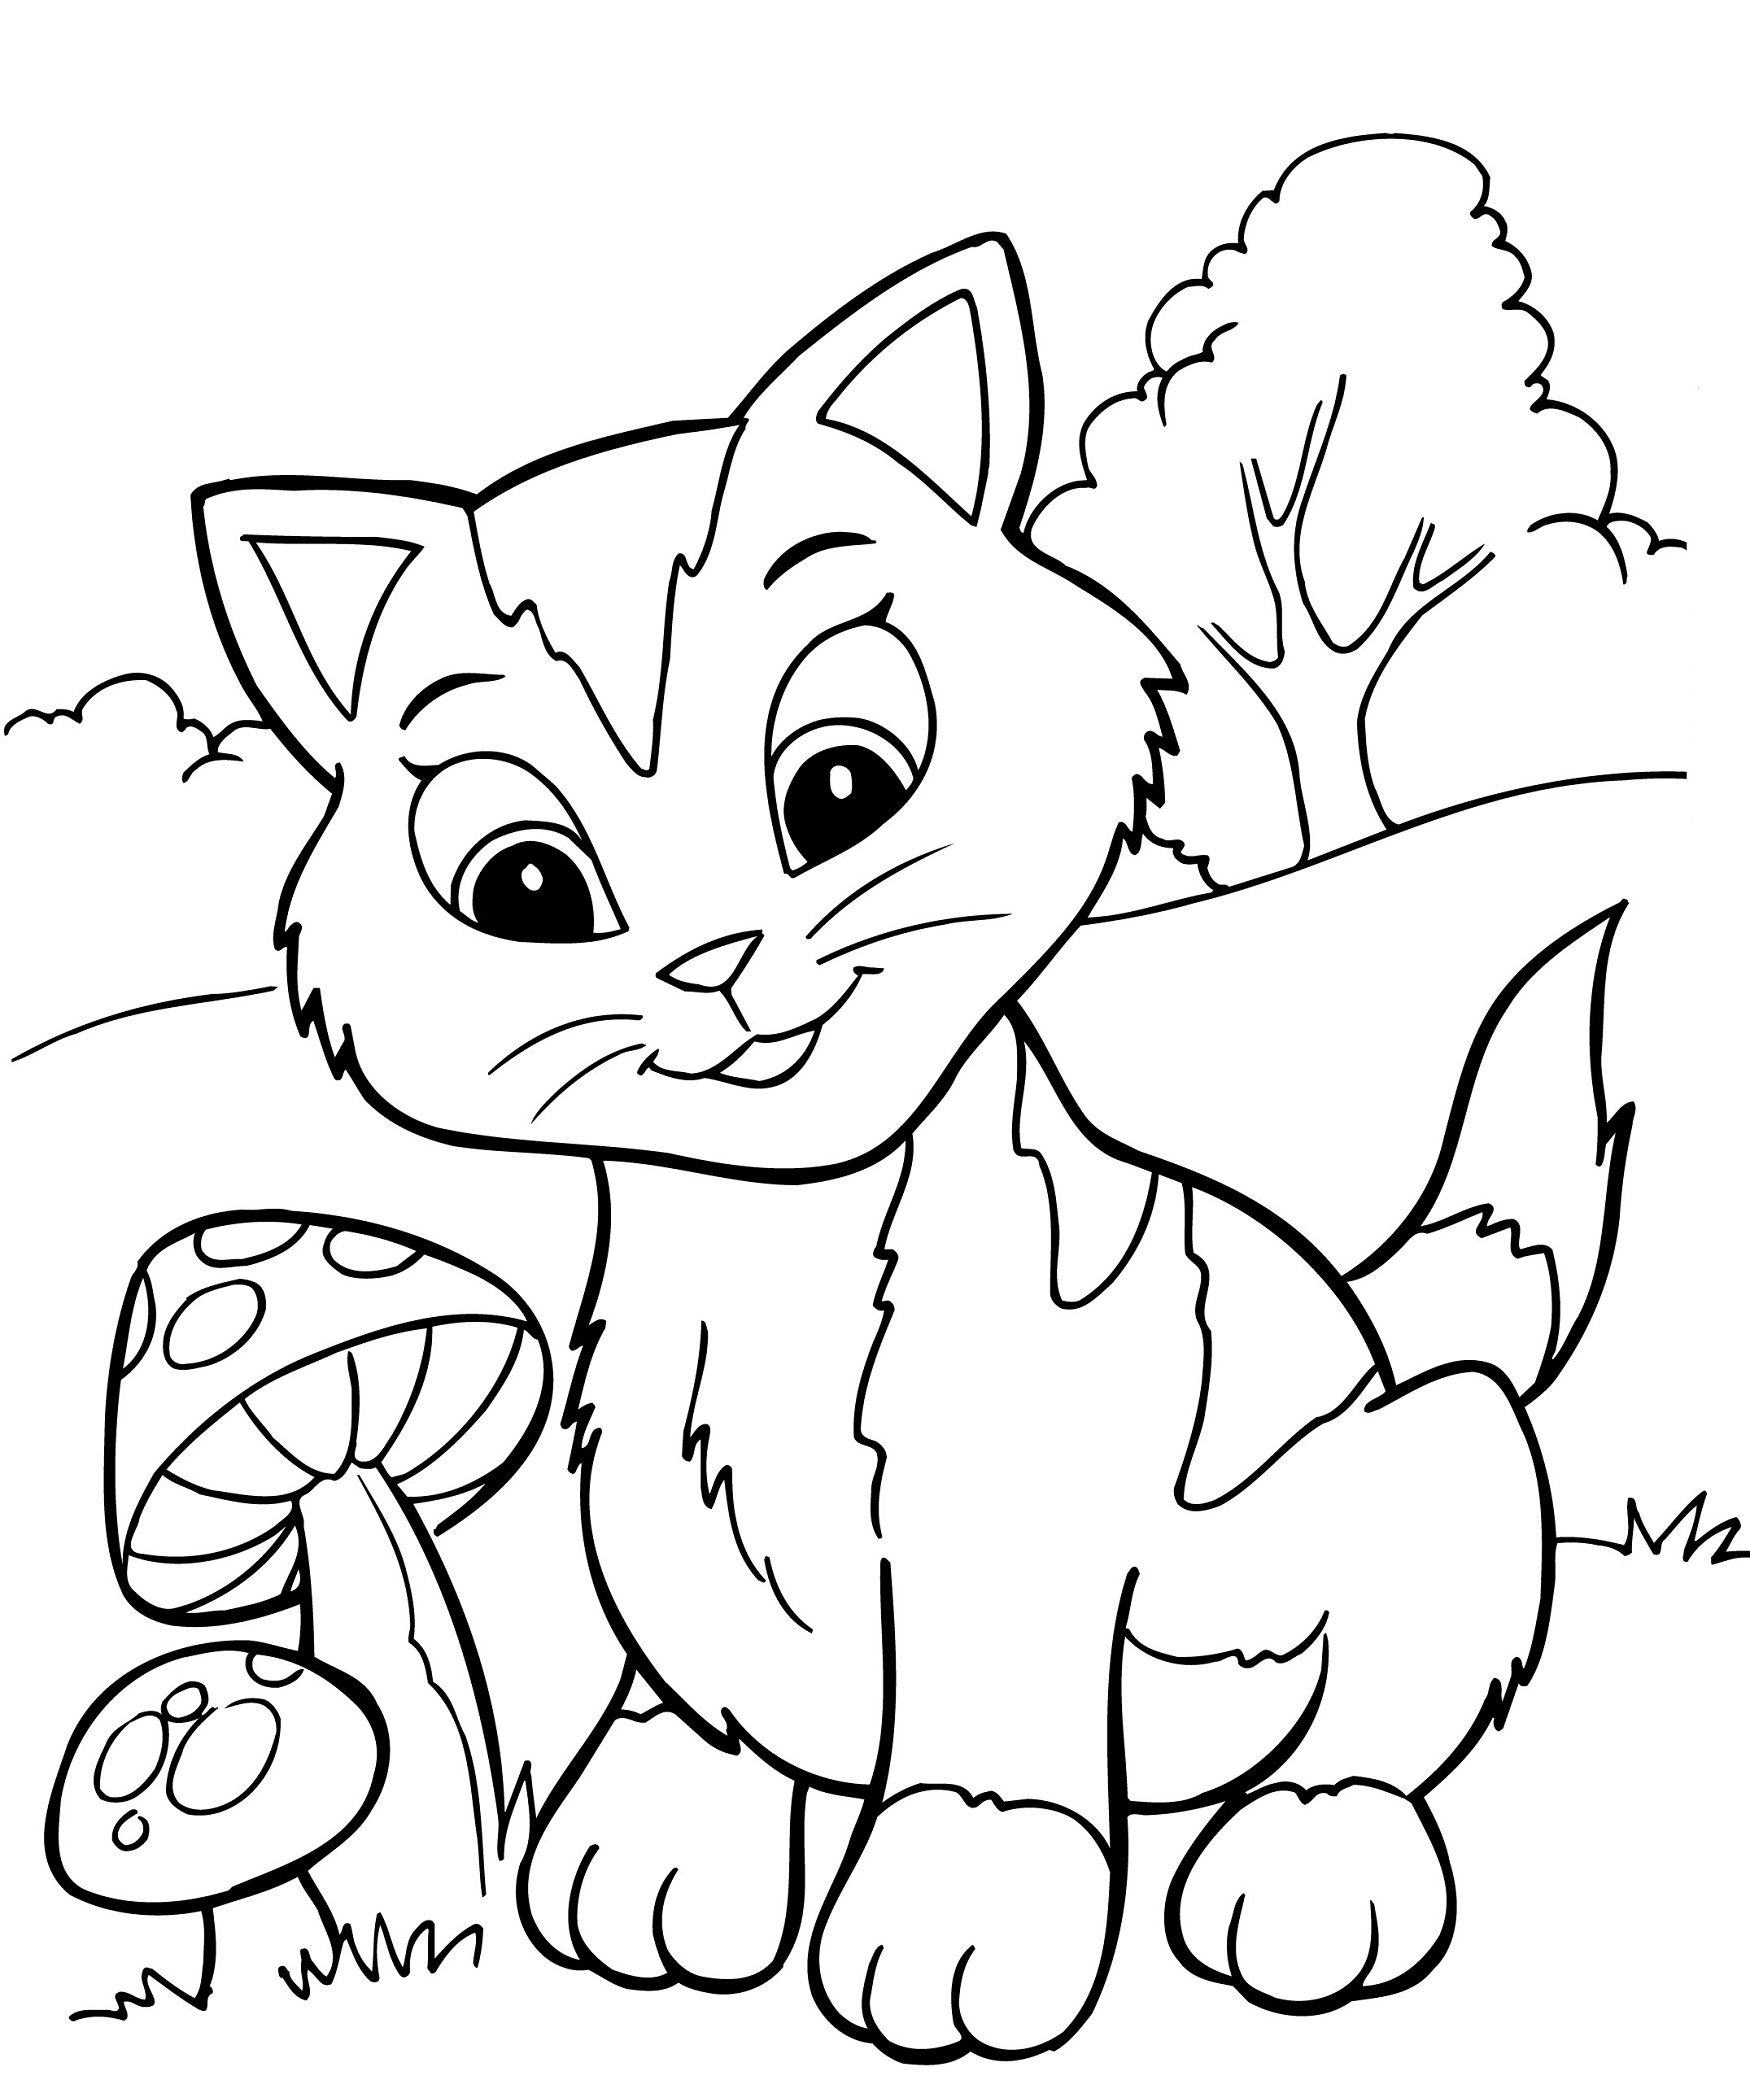 Cute Kitten Coloring Pages Idea | Coloring pages for girls ...